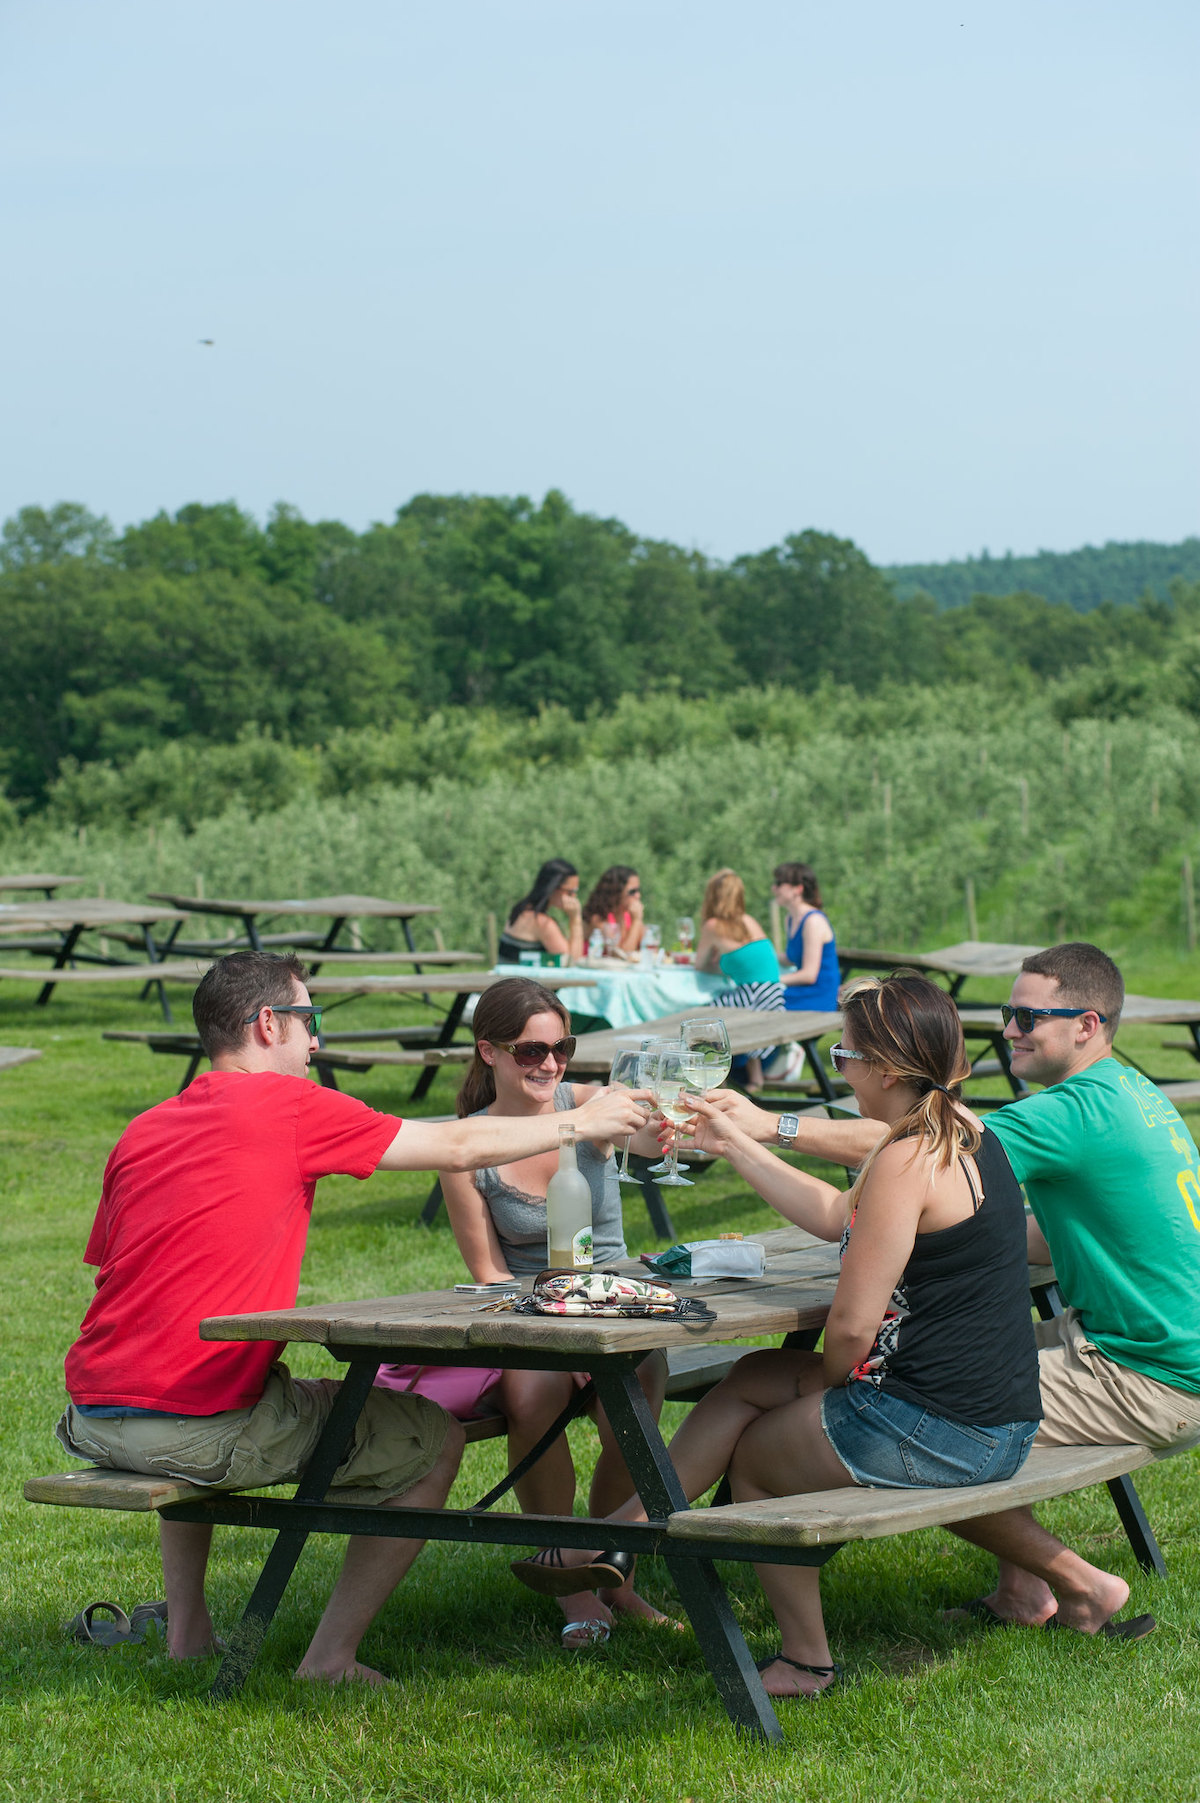 four people sit around a picnic table outside with a vineyard in the background